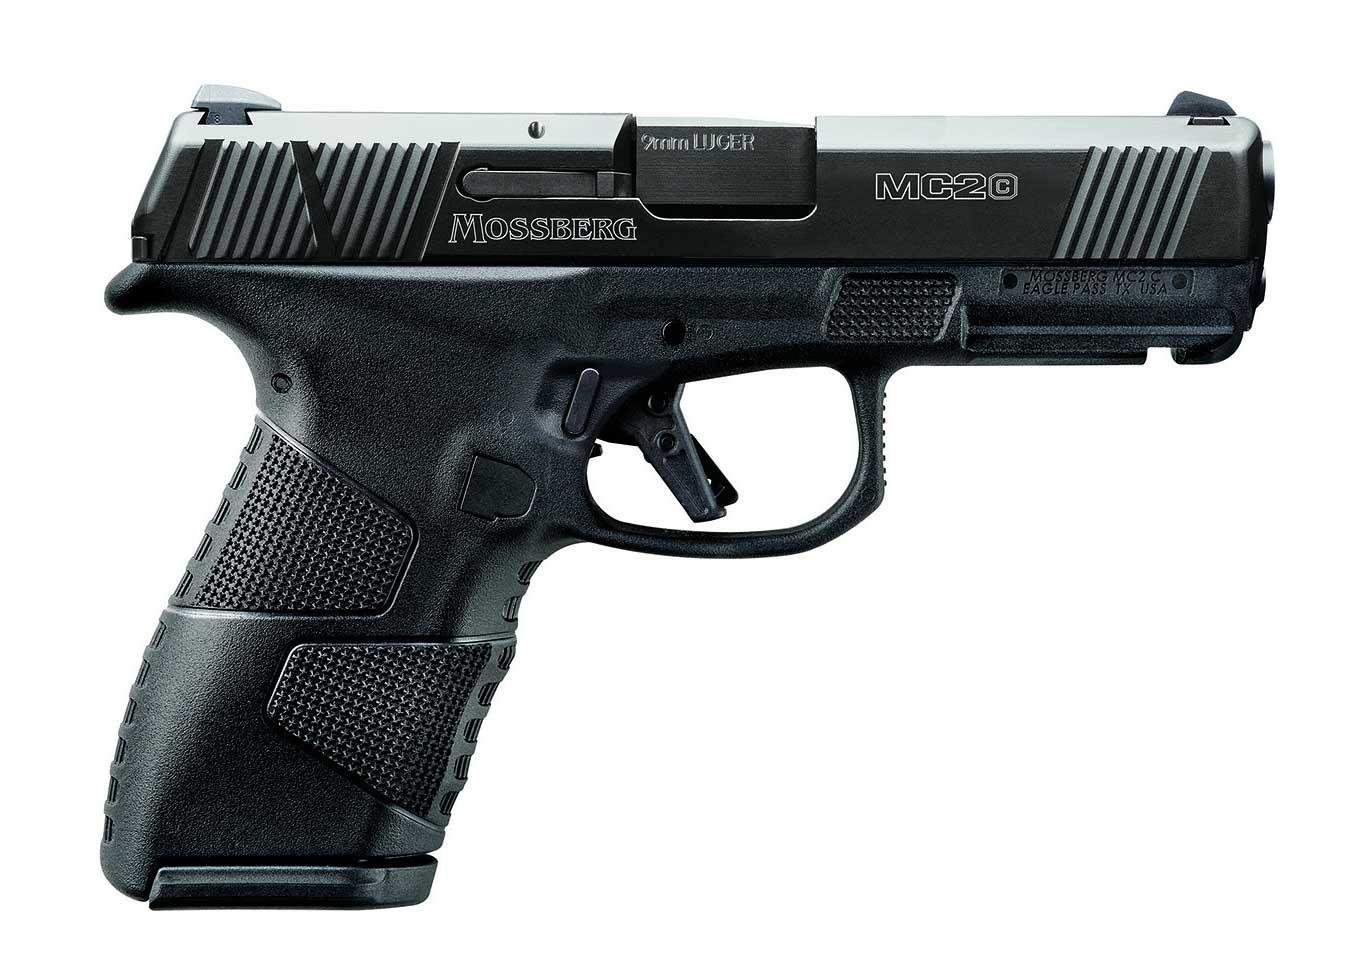 MOSSBERG MC2c 9mm 3.9in Black 15rd - $379.99 (Free S/H on Firearms)